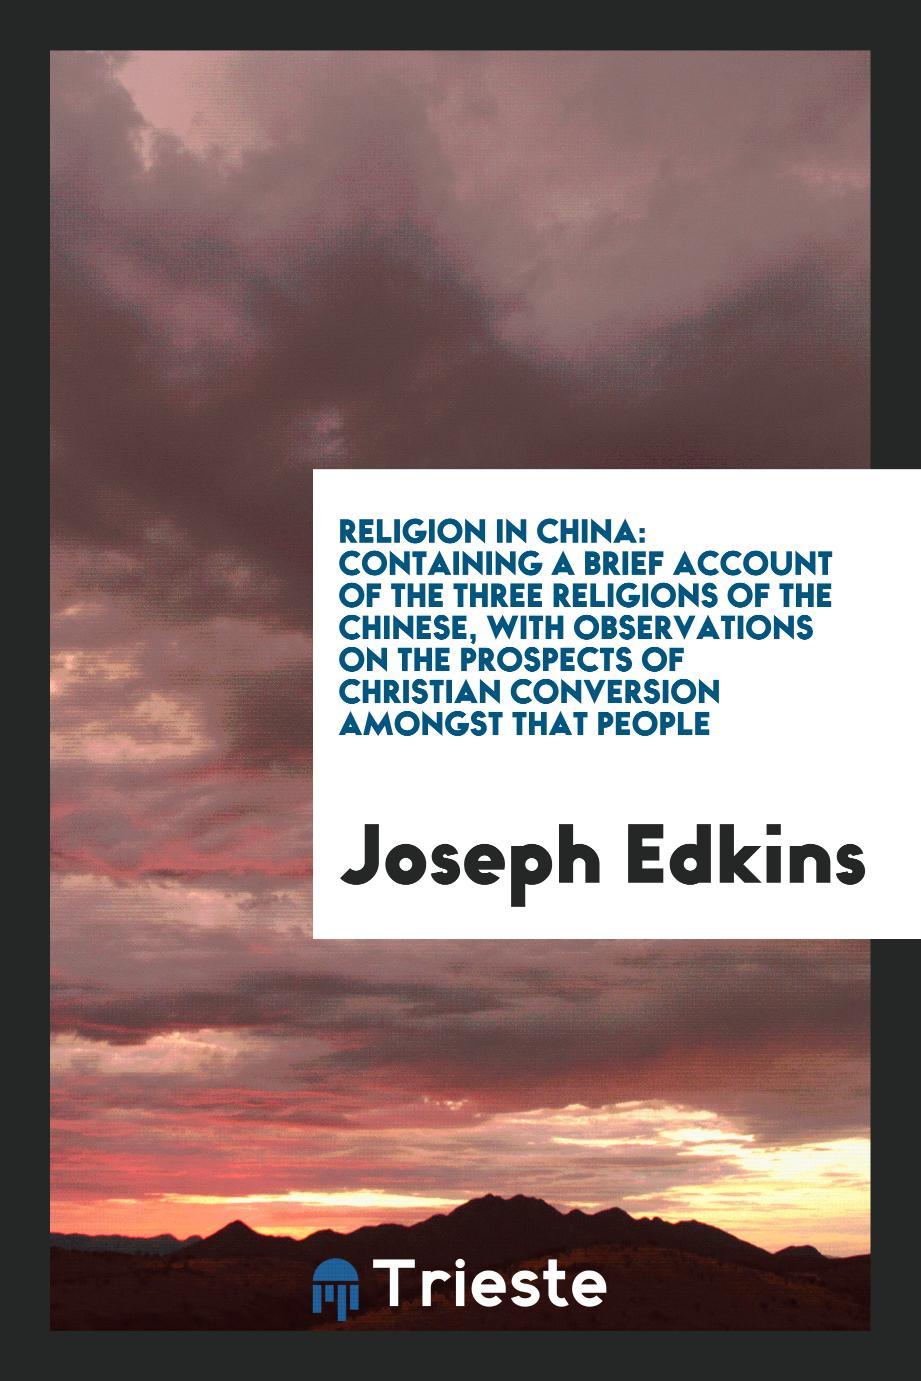 Religion in China: containing a brief account of the three religions of the Chinese, with observations on the prospects of Christian conversion amongst that people